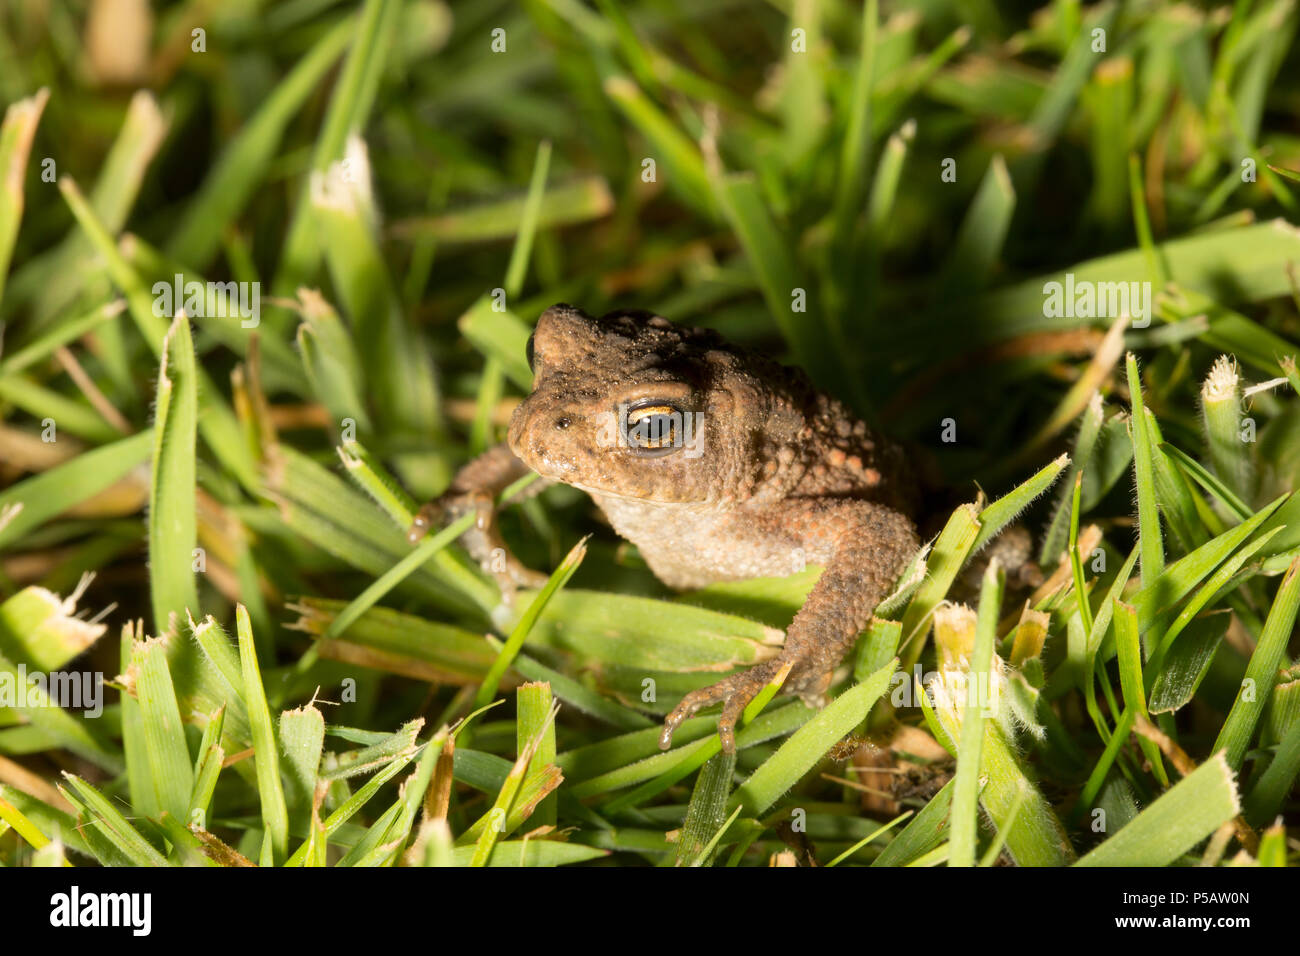 A toad, Bufo bufo, on a mown lawn in a garden photographed at night. Lancashire north west England UK GB Stock Photo